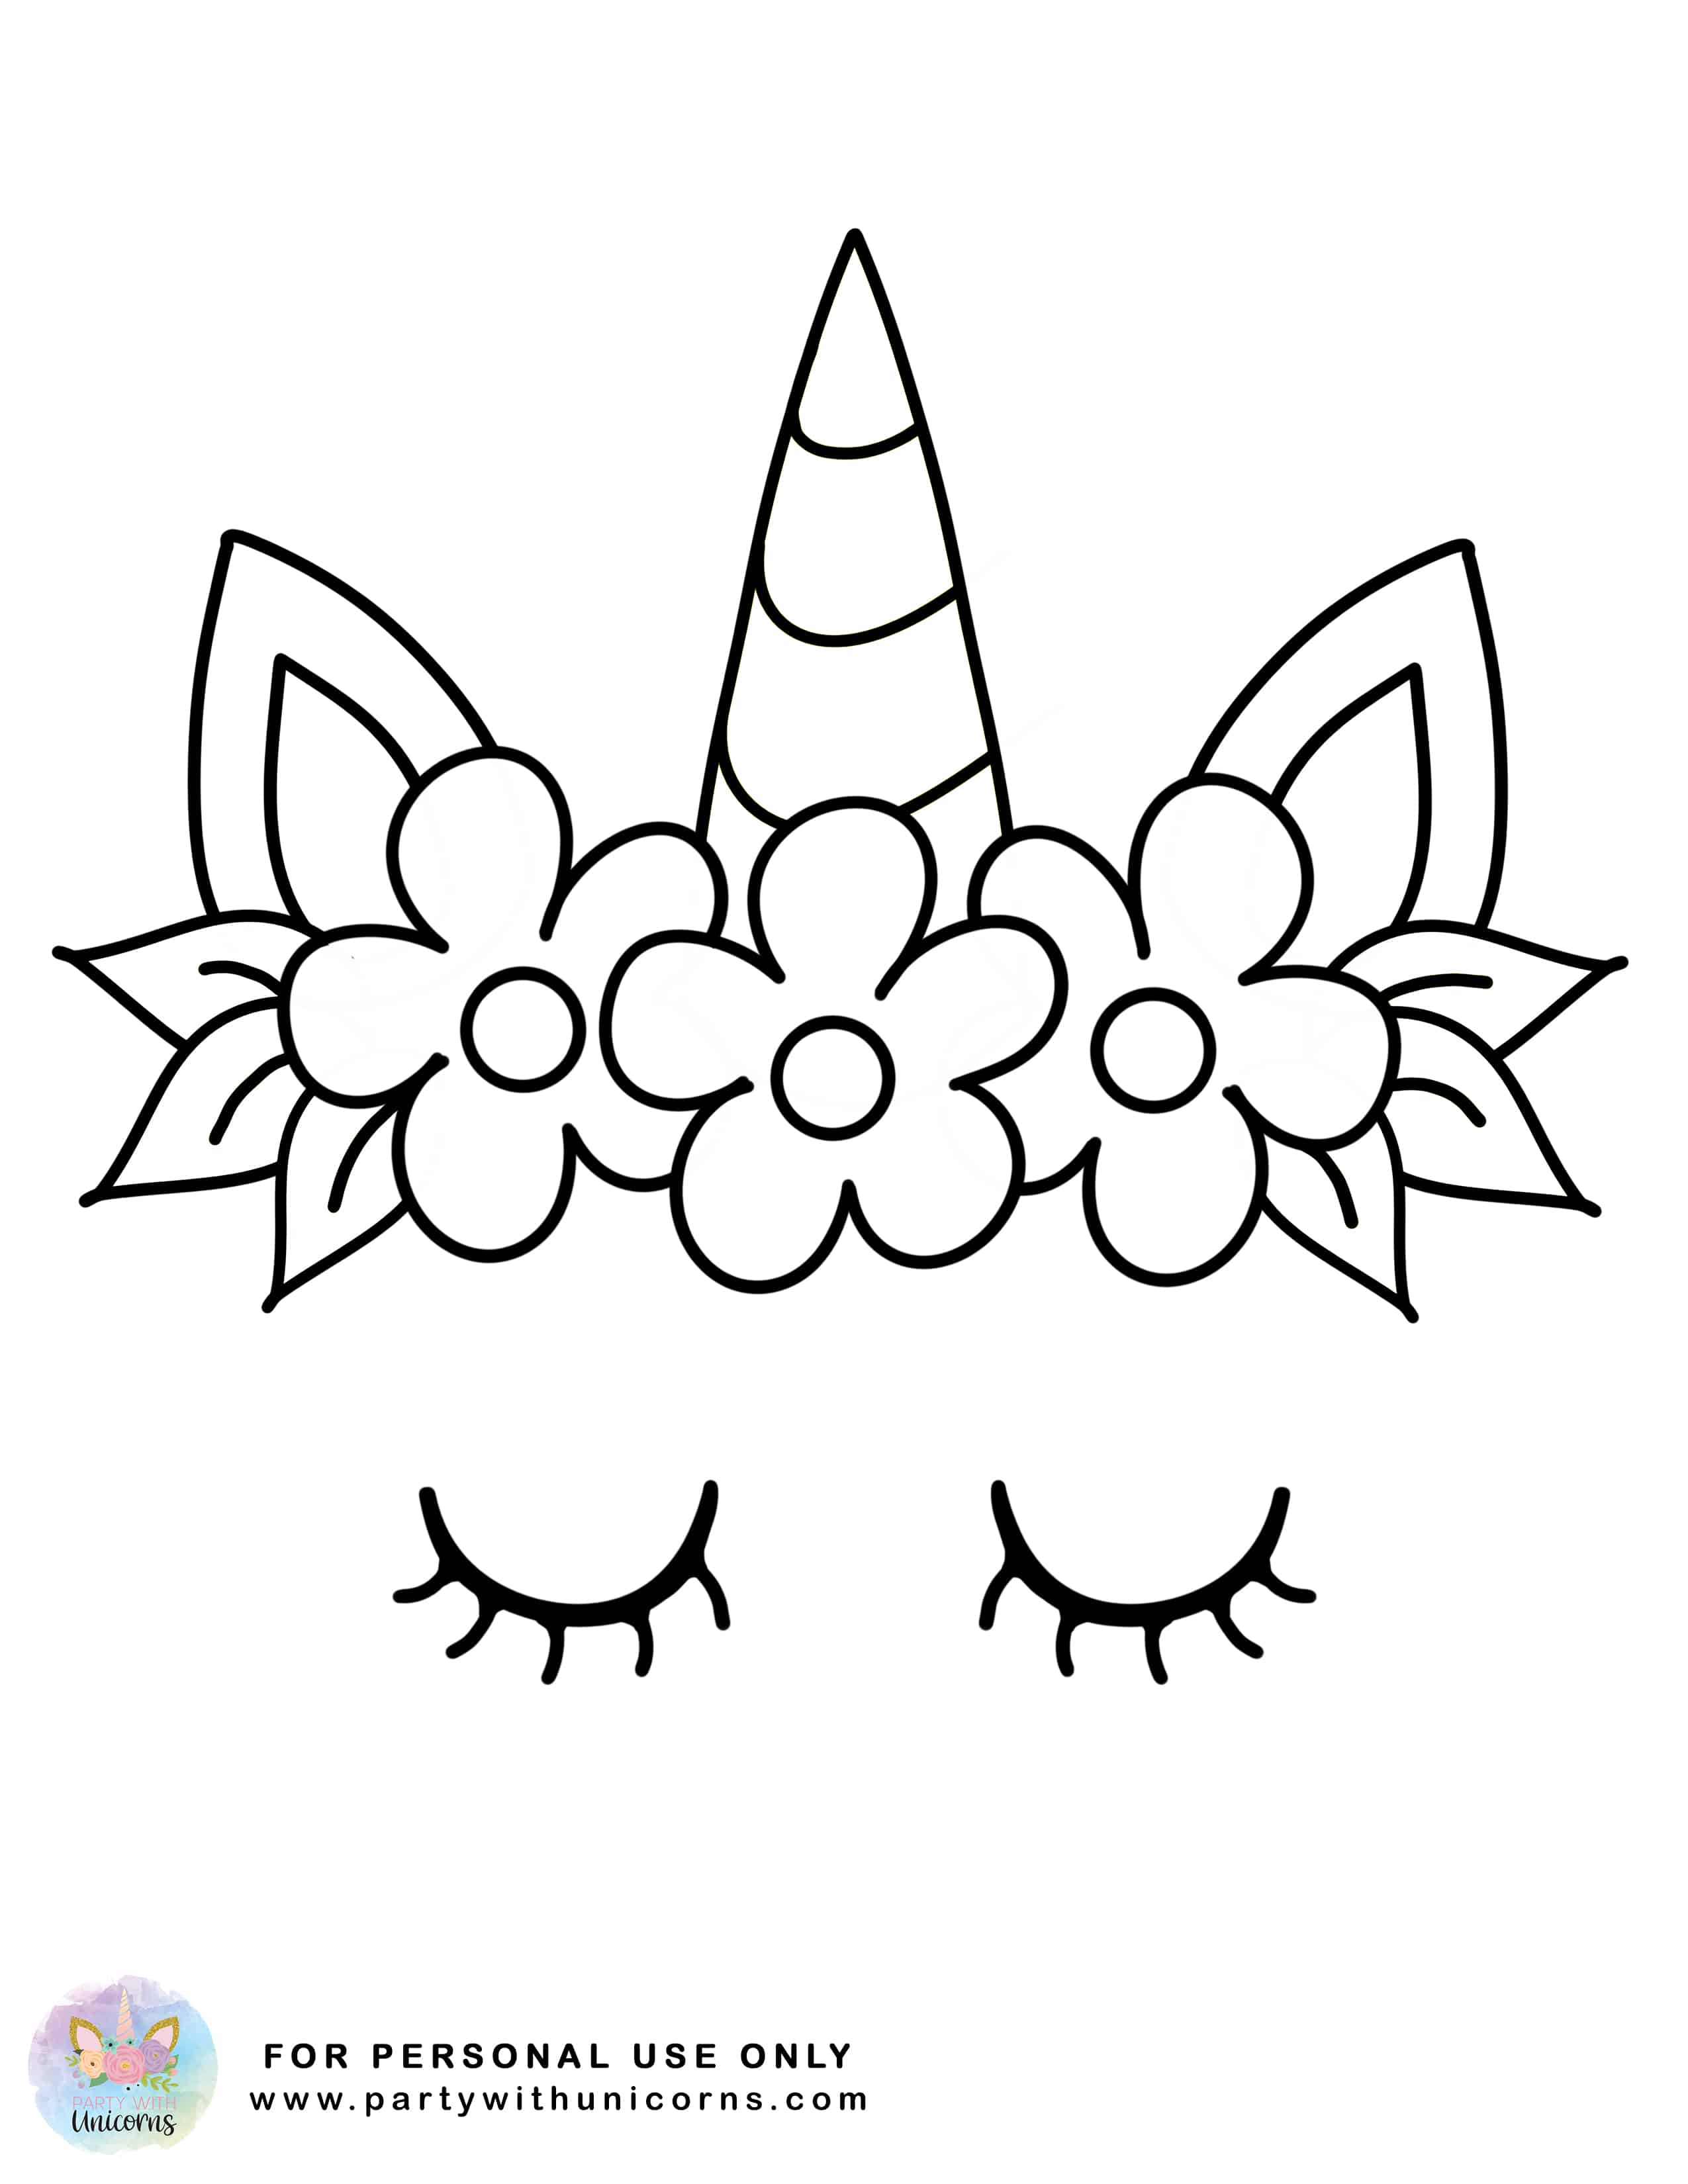 unicorn-coloring-pages-free-printable-coloring-book